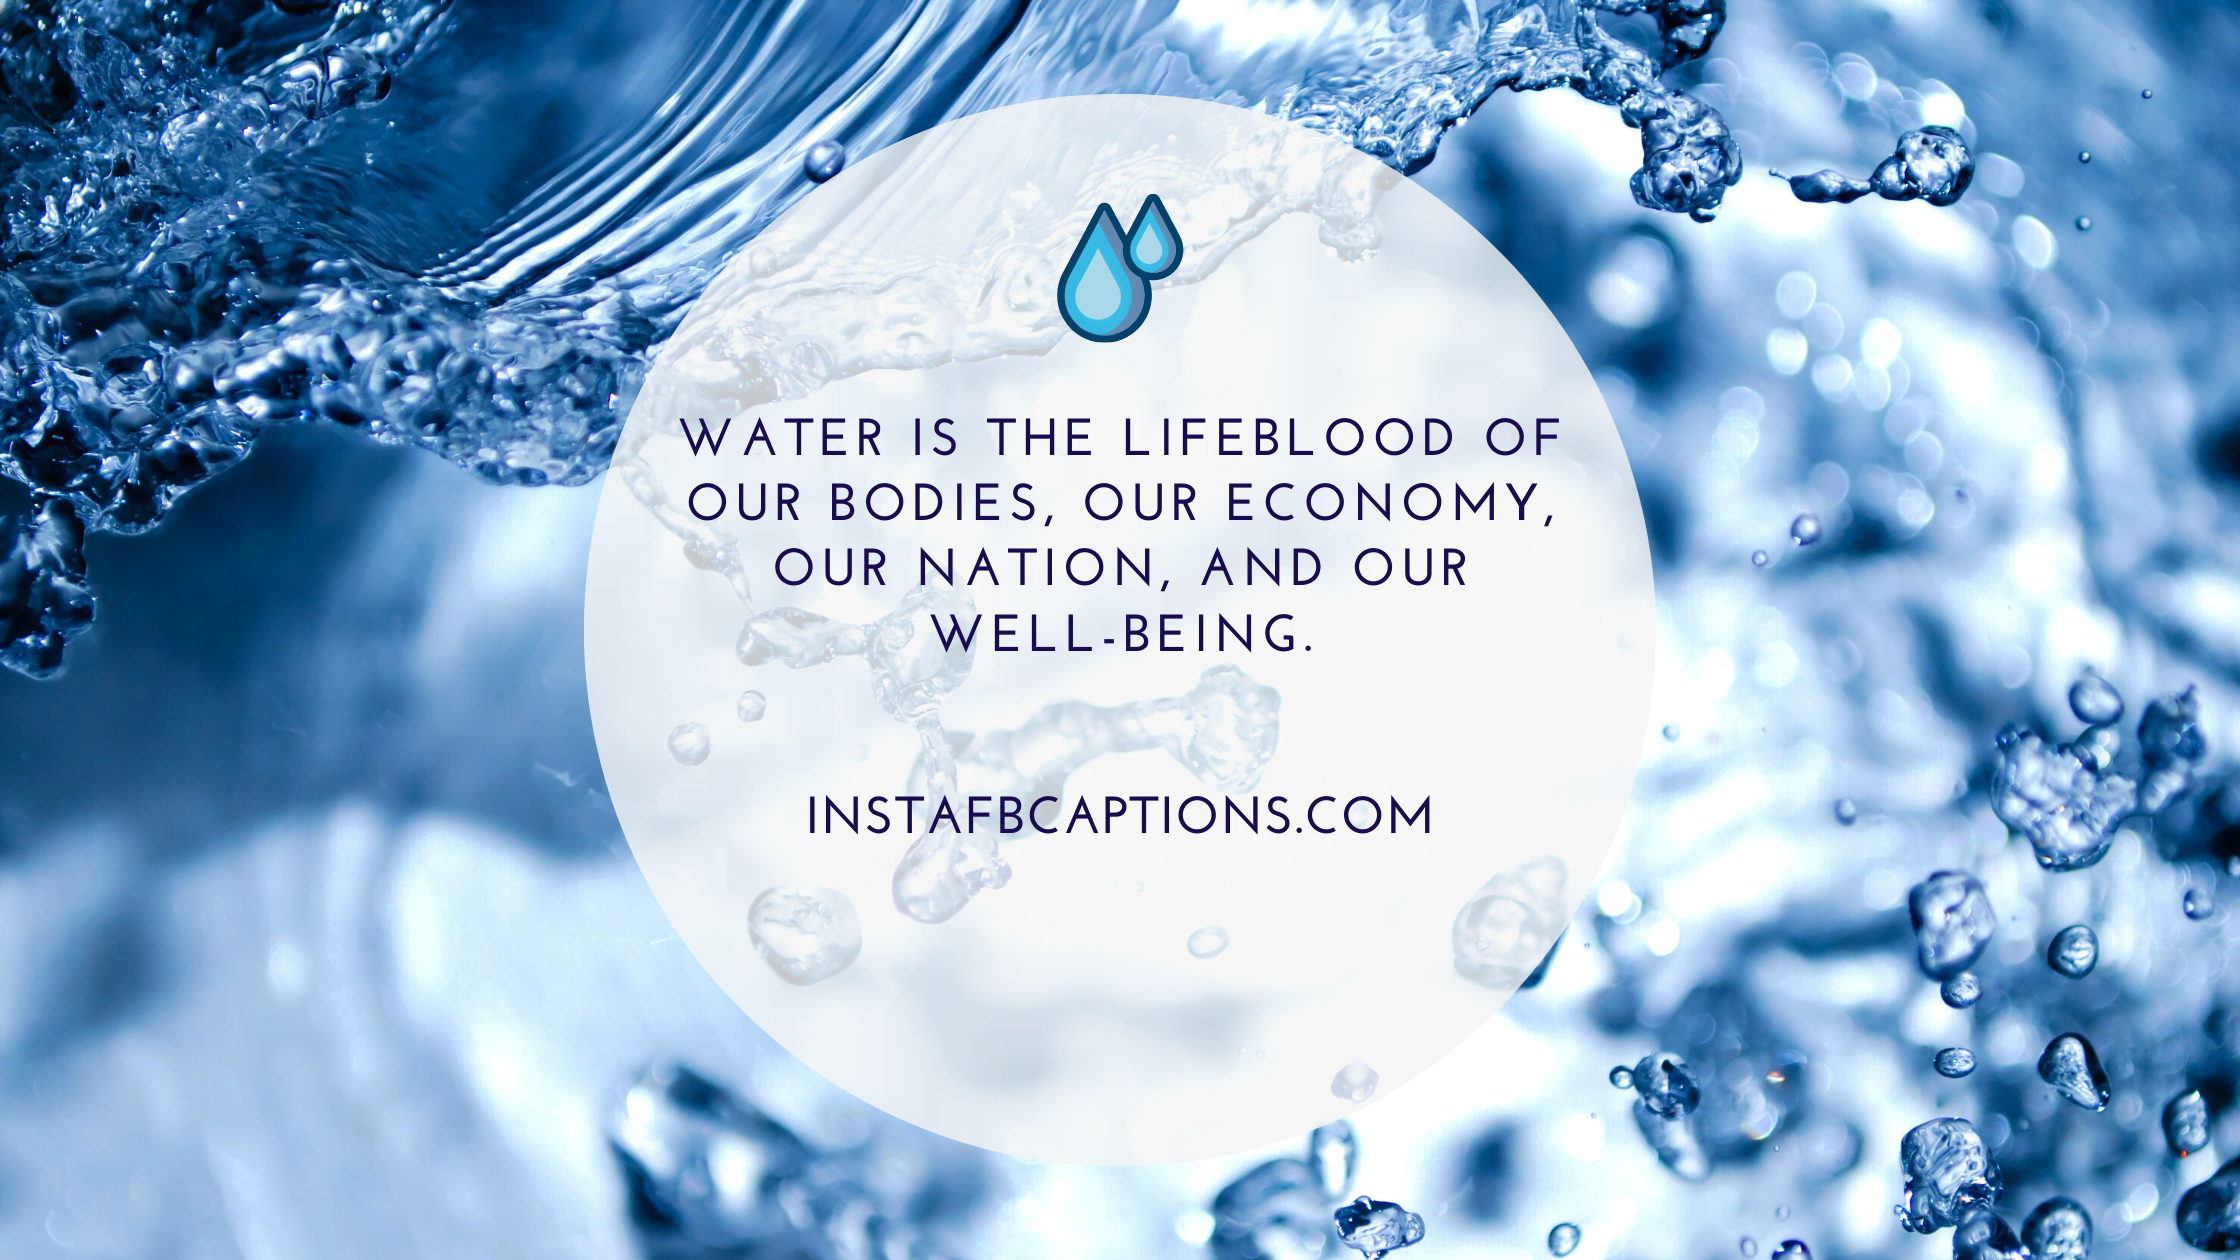 Water Captions For Instagram  - Water captions for Instagram - Water Instagram Captions for Drop and Reflection Pictures in 2022